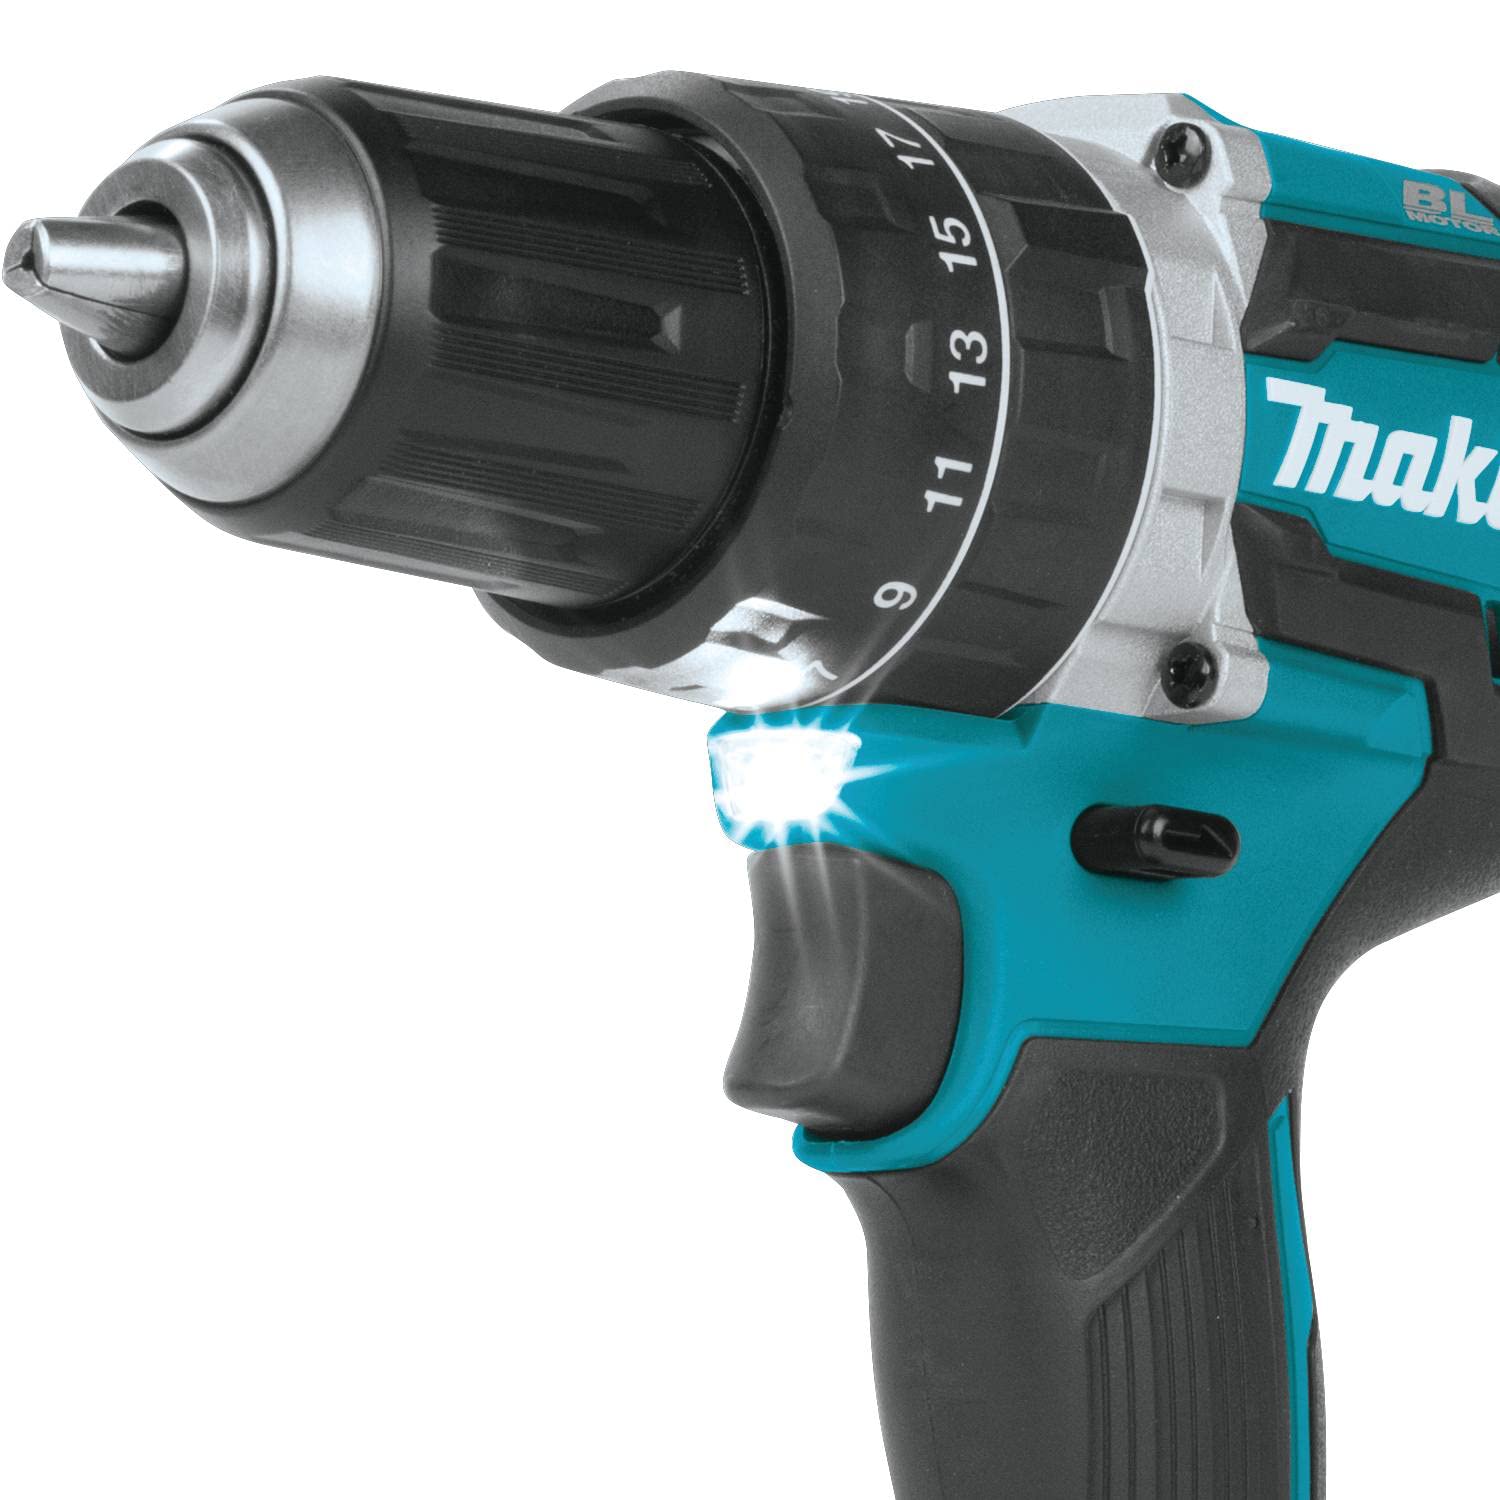 Makita XPH12R 18V LXT Lithium-Ion Compact Brushless Cordless 1/2